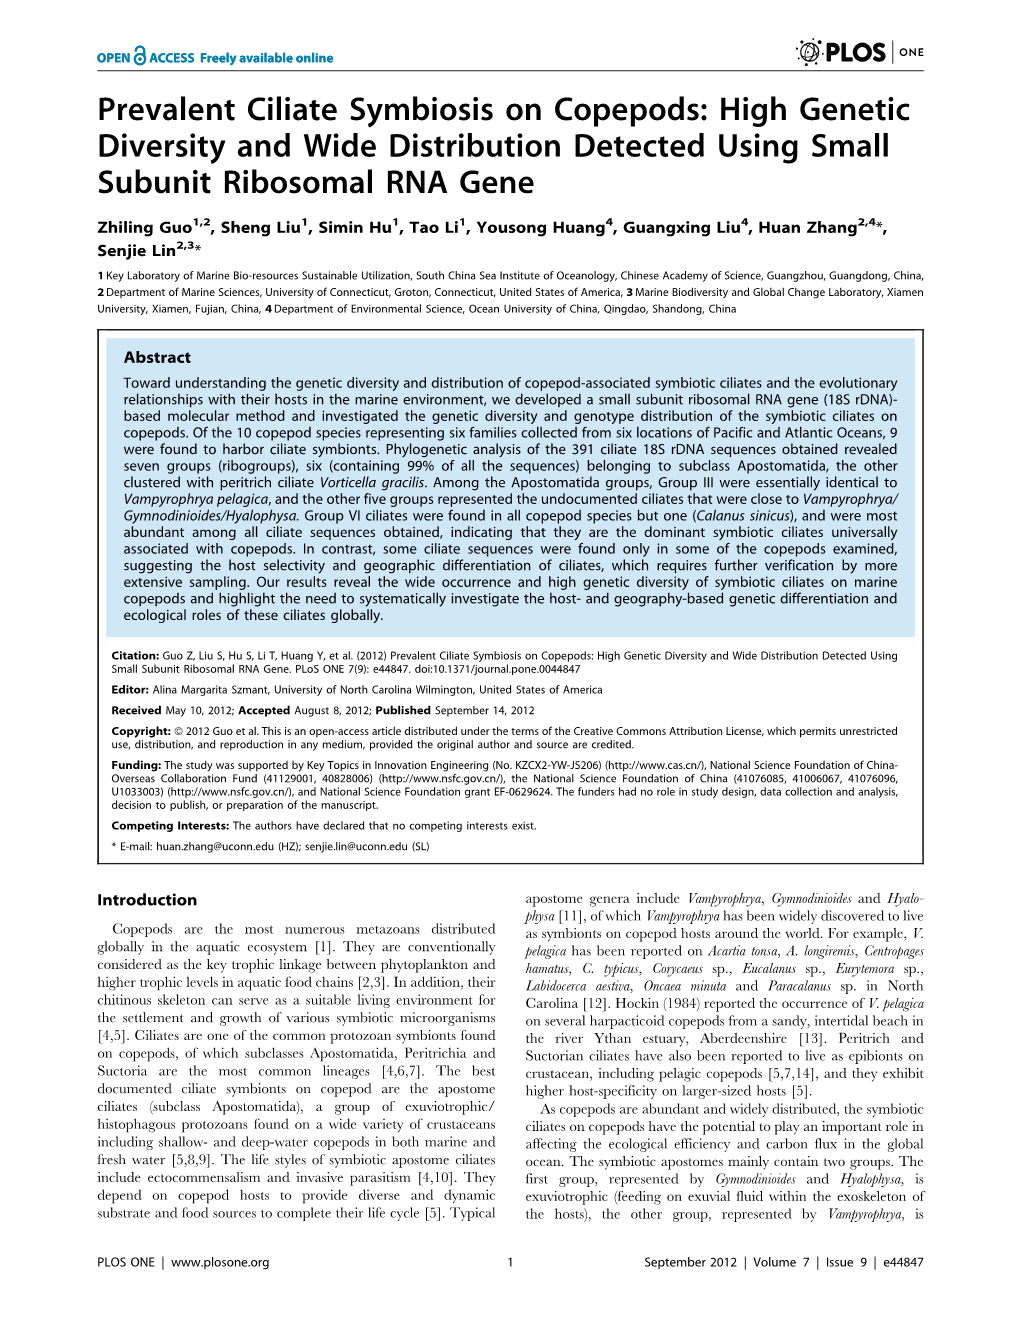 Prevalent Ciliate Symbiosis on Copepods: High Genetic Diversity and Wide Distribution Detected Using Small Subunit Ribosomal RNA Gene